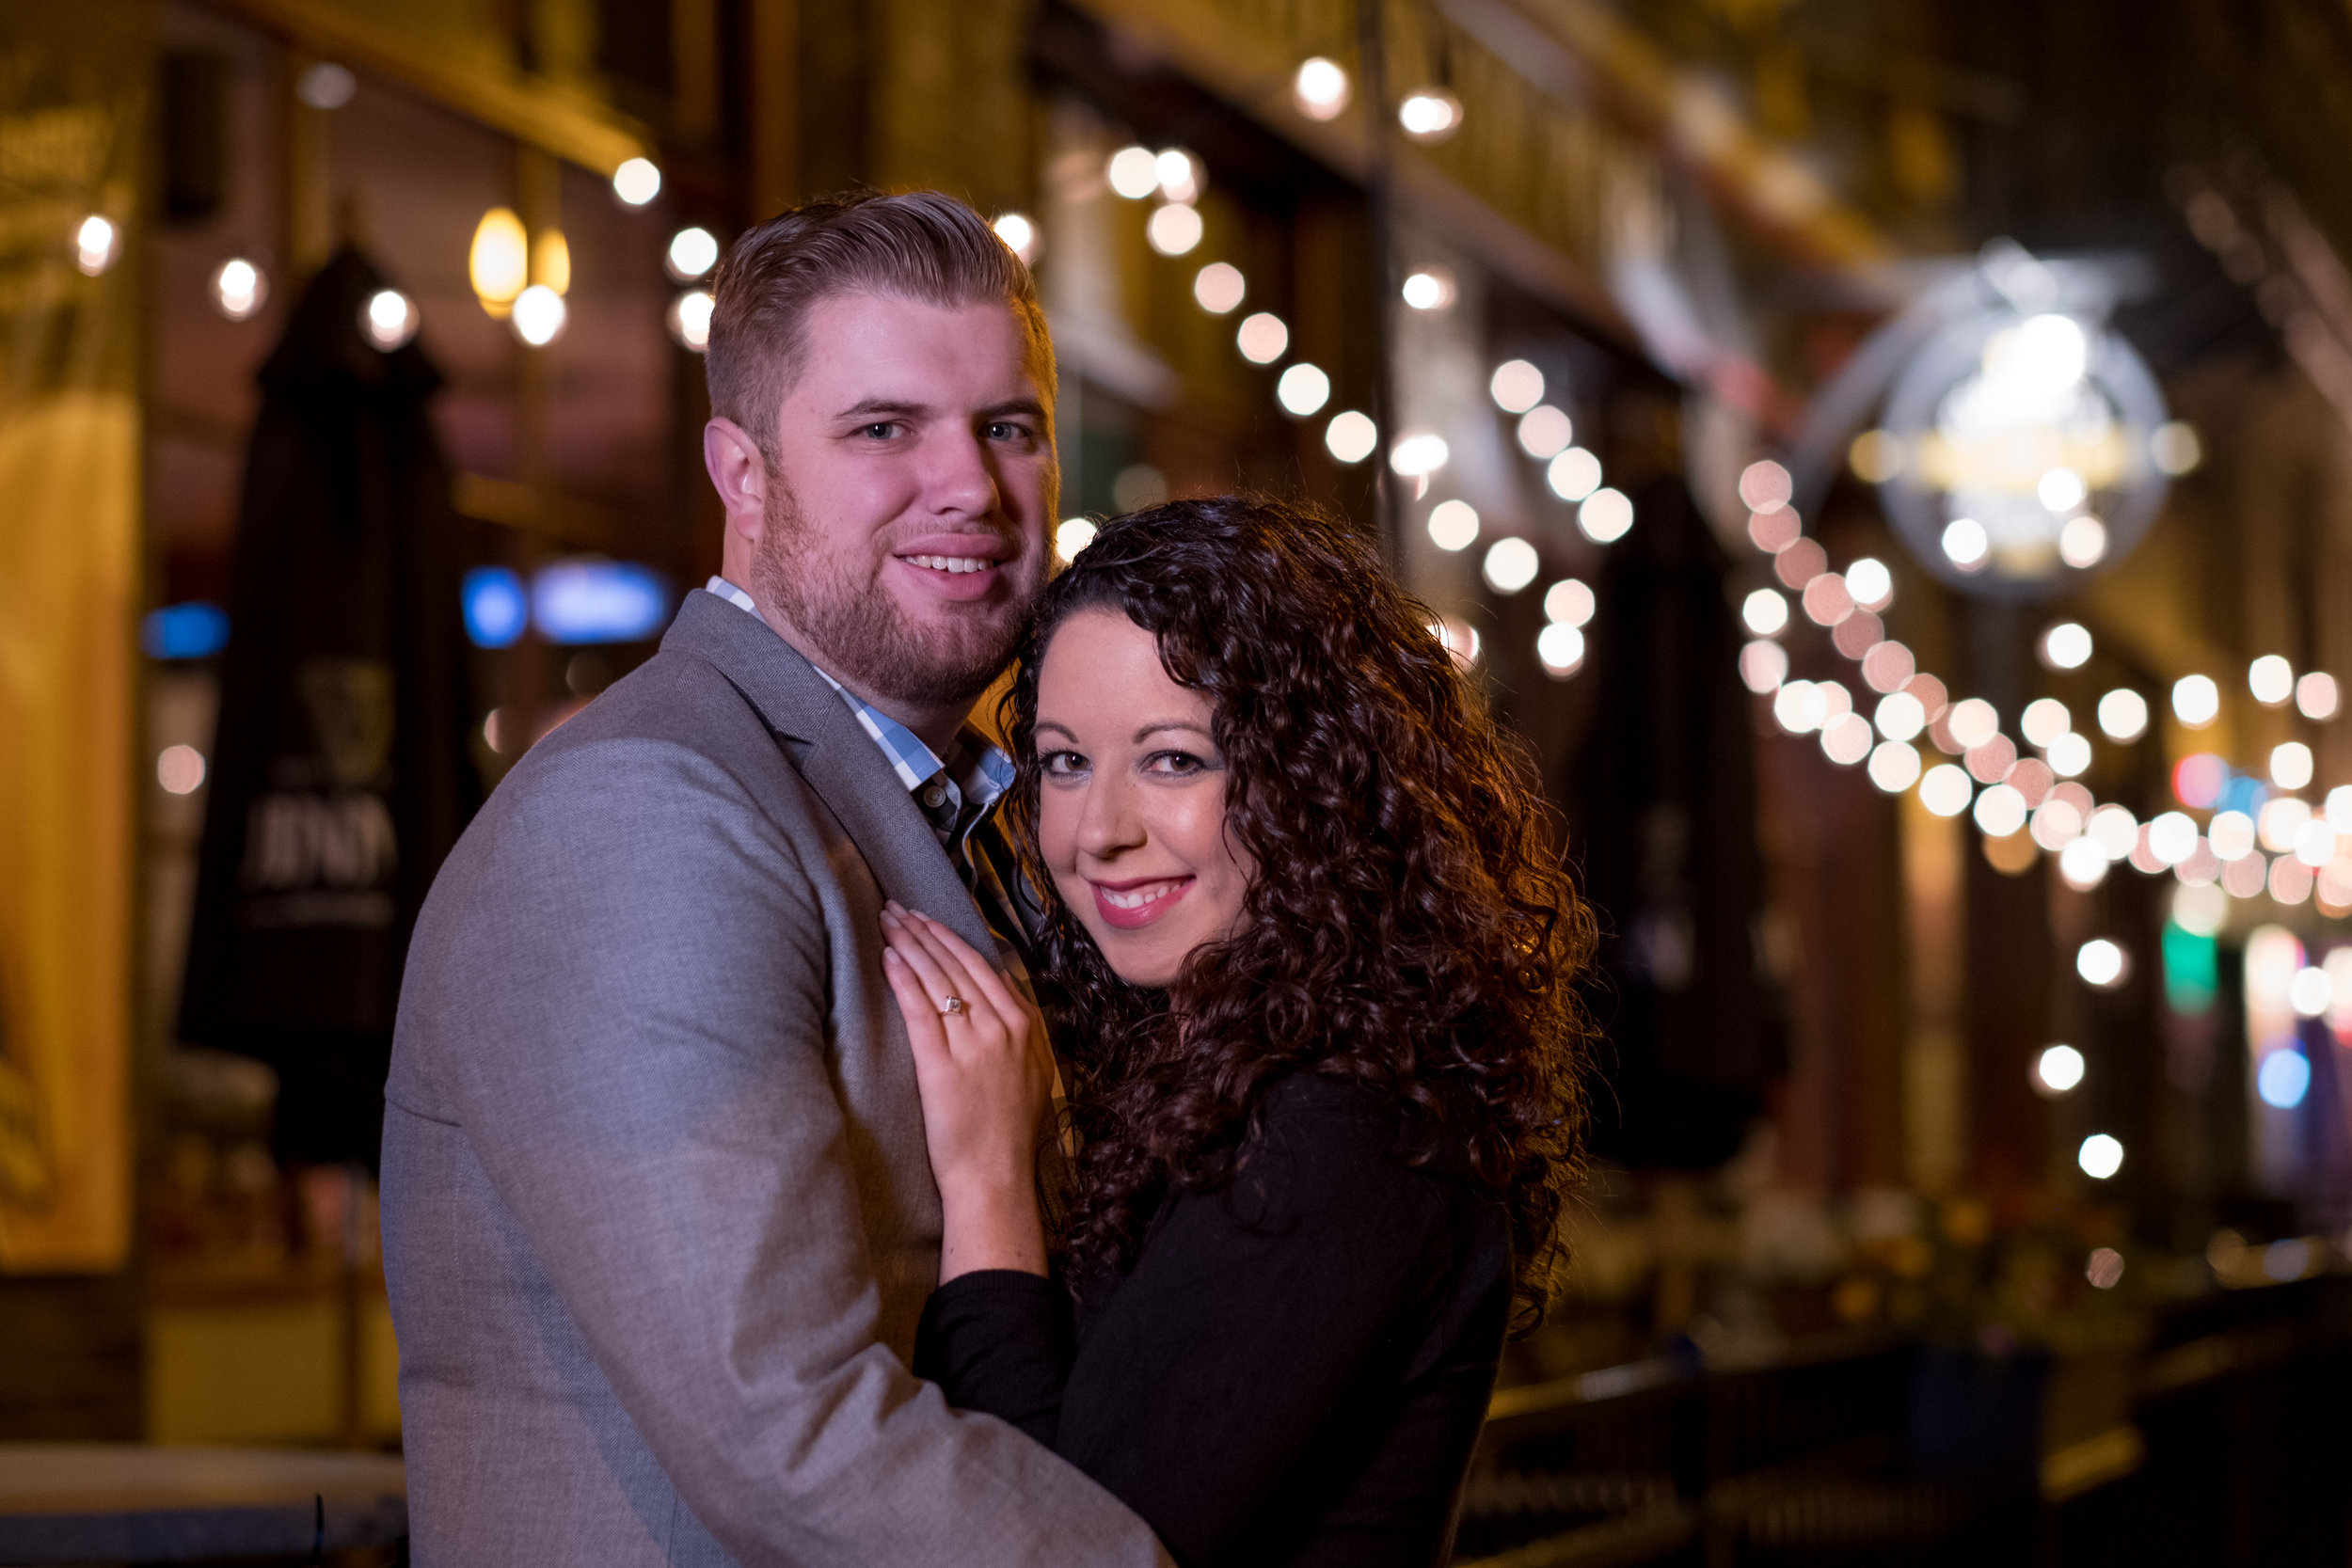 Downtown-Indianapolis-night-engagement-pictures-14.jpg